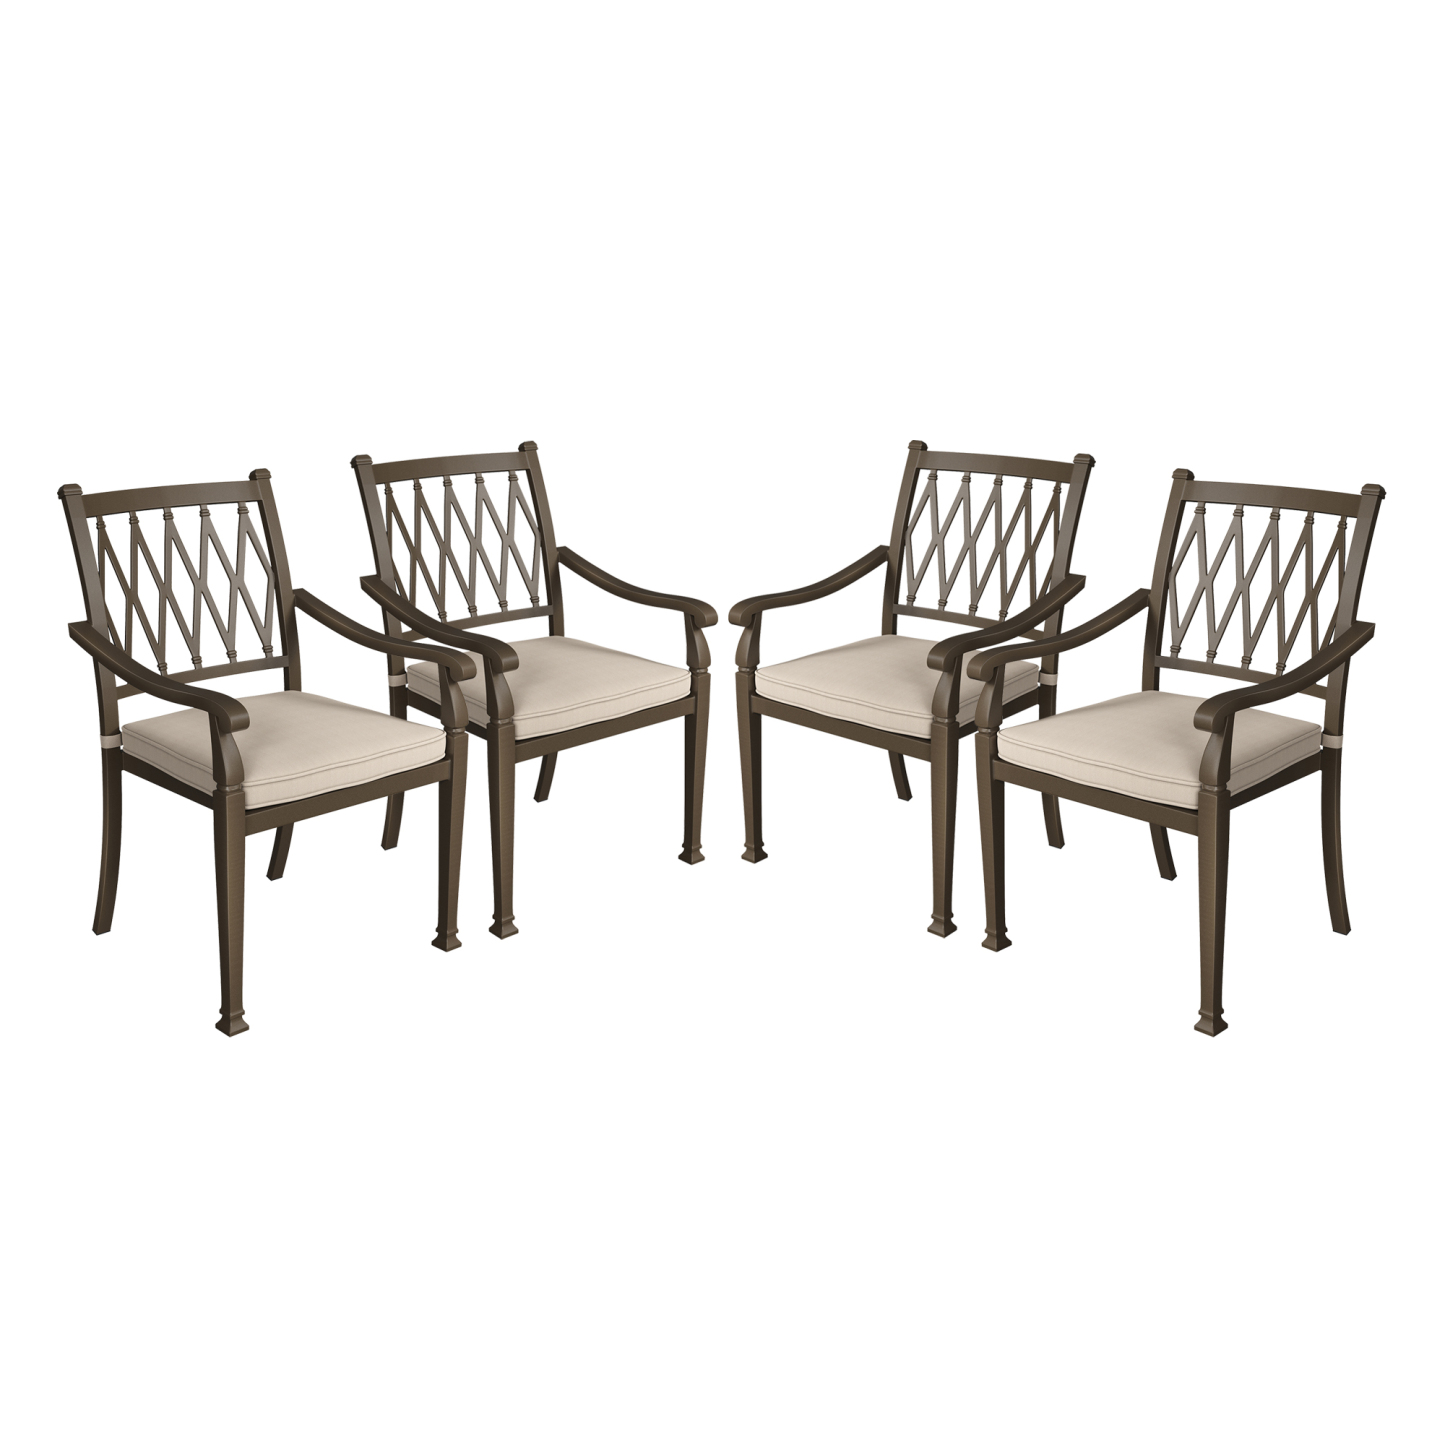 Set of 4 Outdoor Dining Chair Cast Aluminum Frame with Cushion Extra W